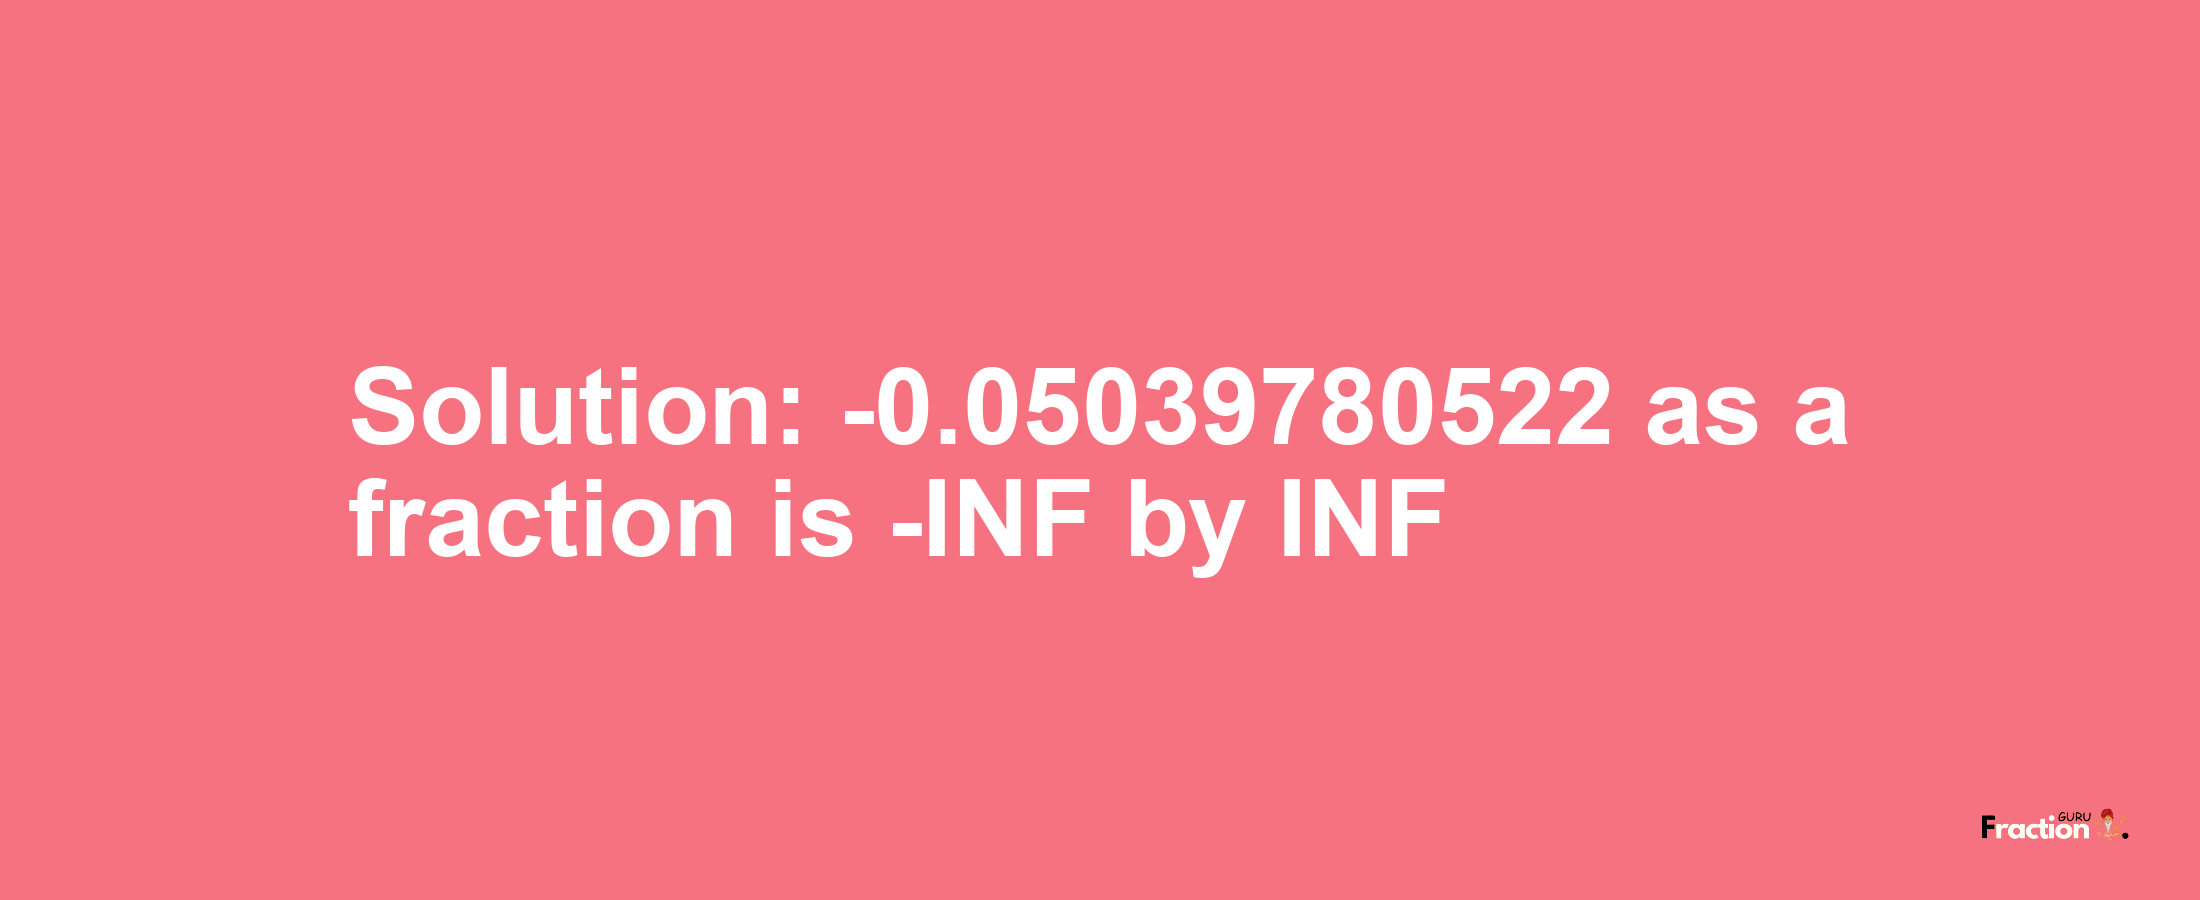 Solution:-0.05039780522 as a fraction is -INF/INF